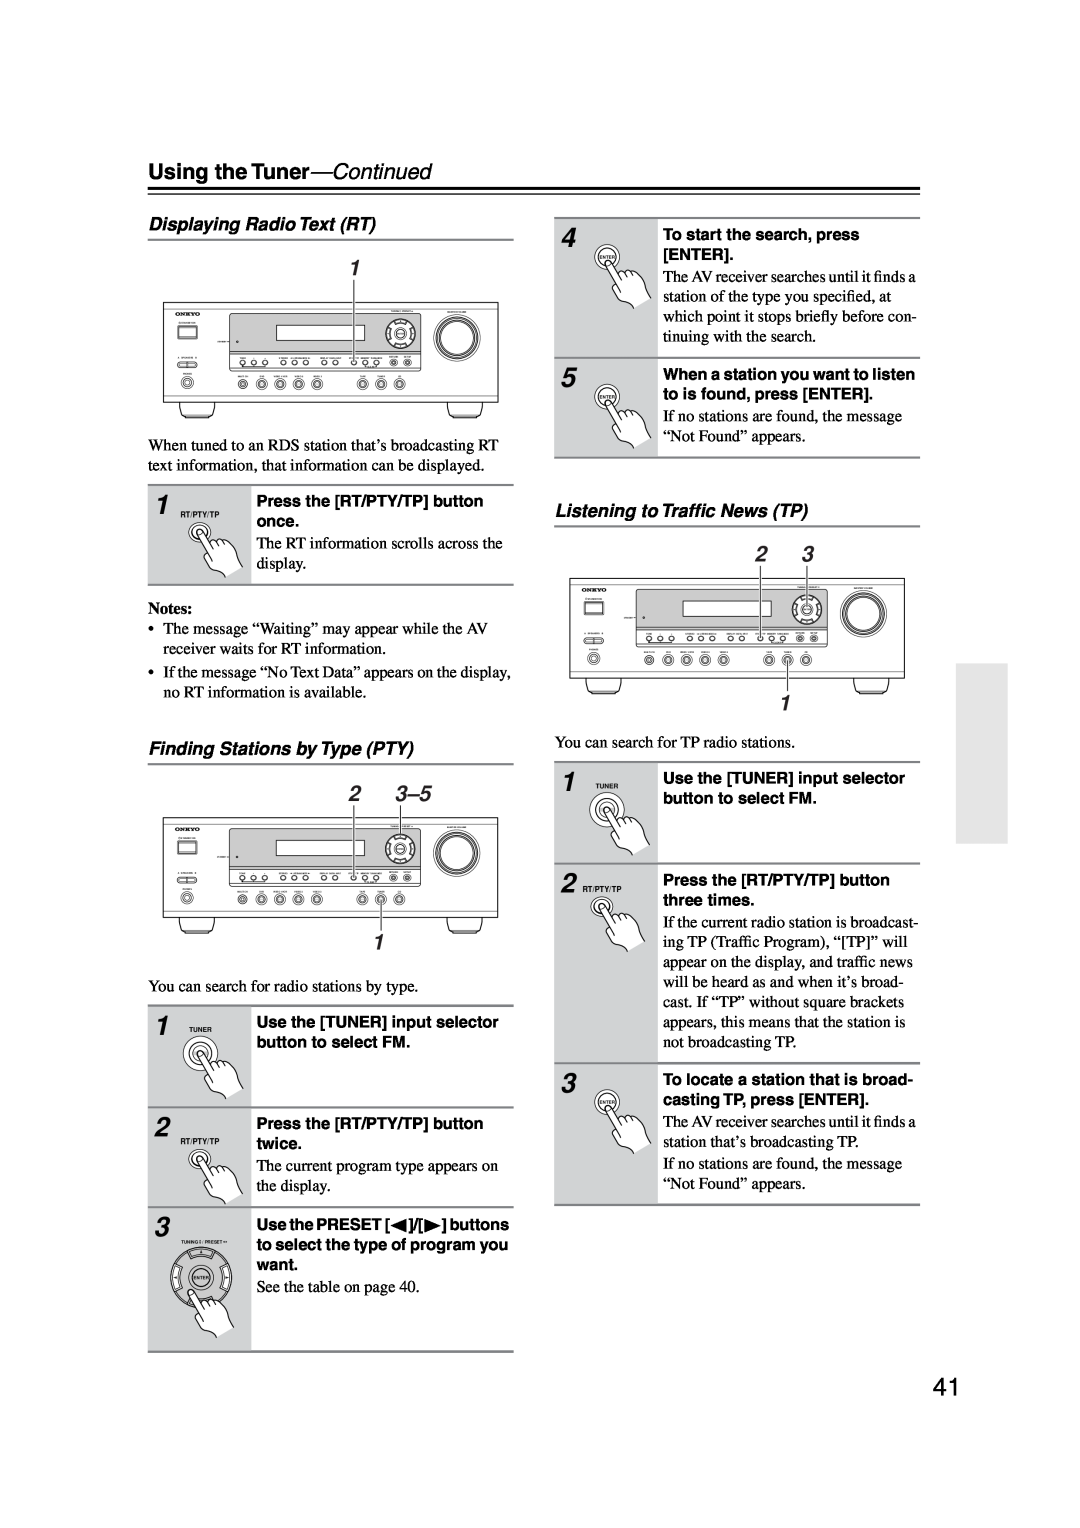 Onkyo TX-SR304 instruction manual Displaying Radio Text RT, Finding Stations by Type PTY, Listening to Trafﬁc News TP 